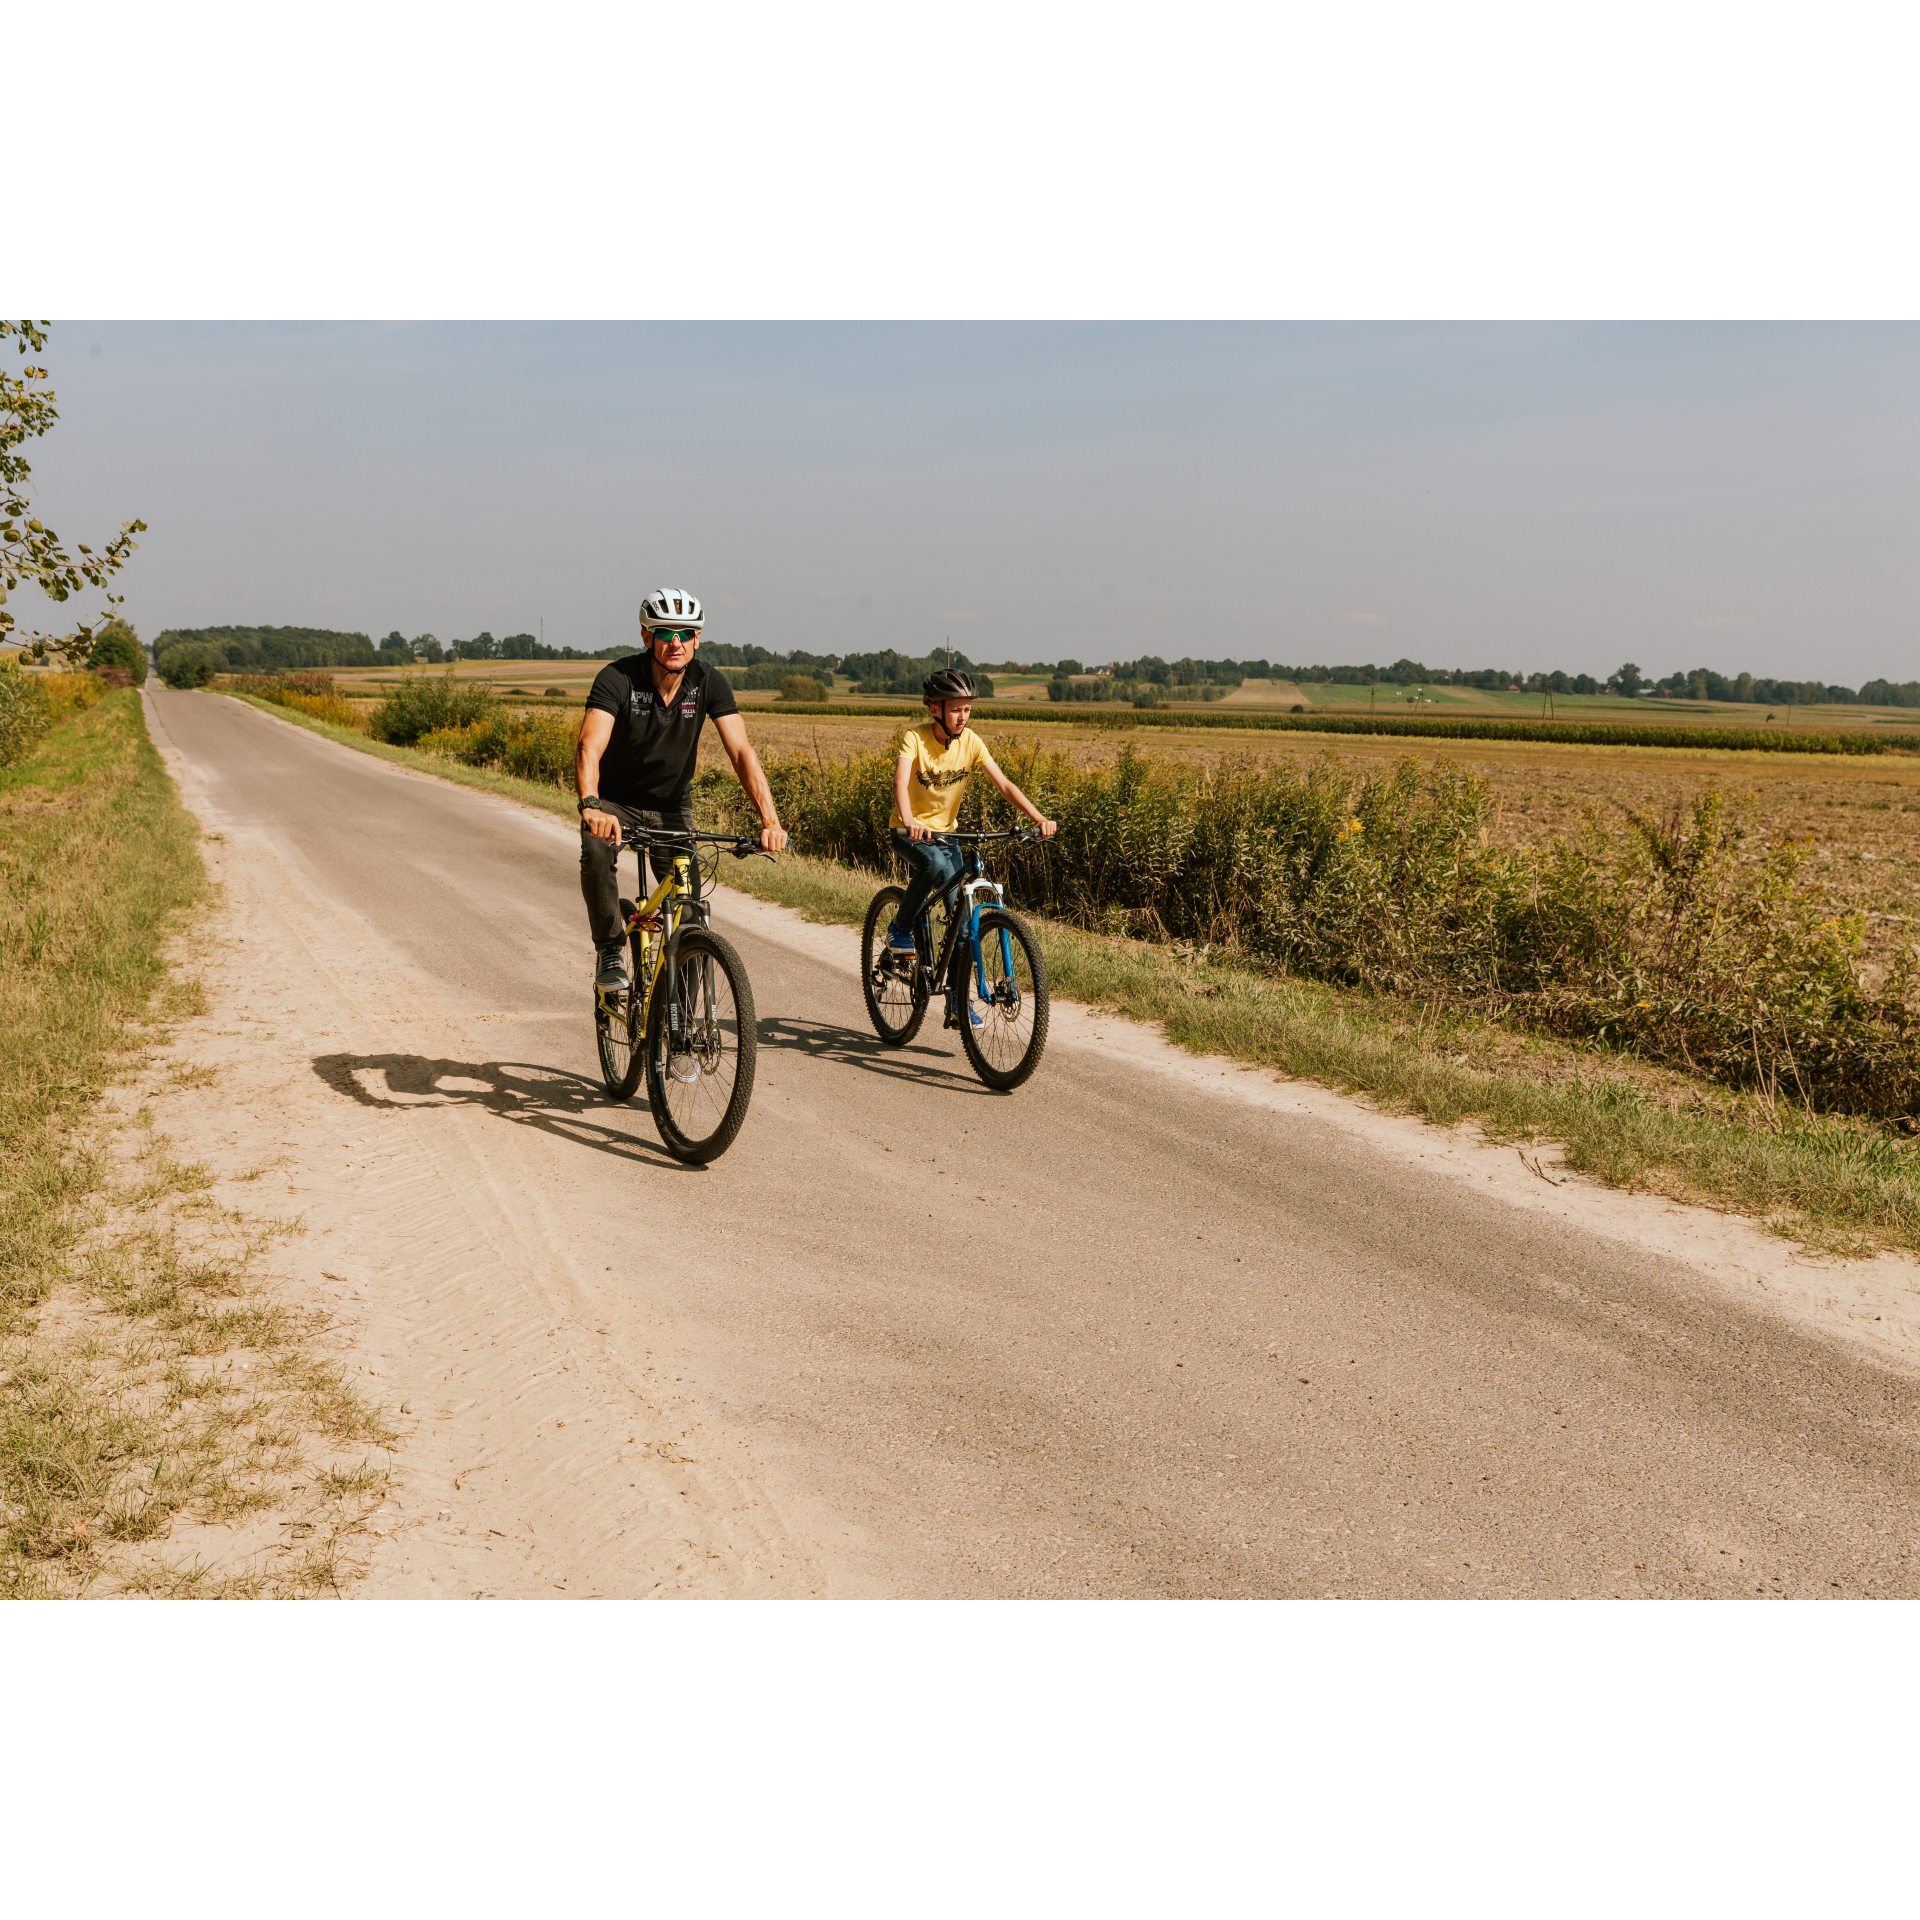 Cyclists on a dirt road